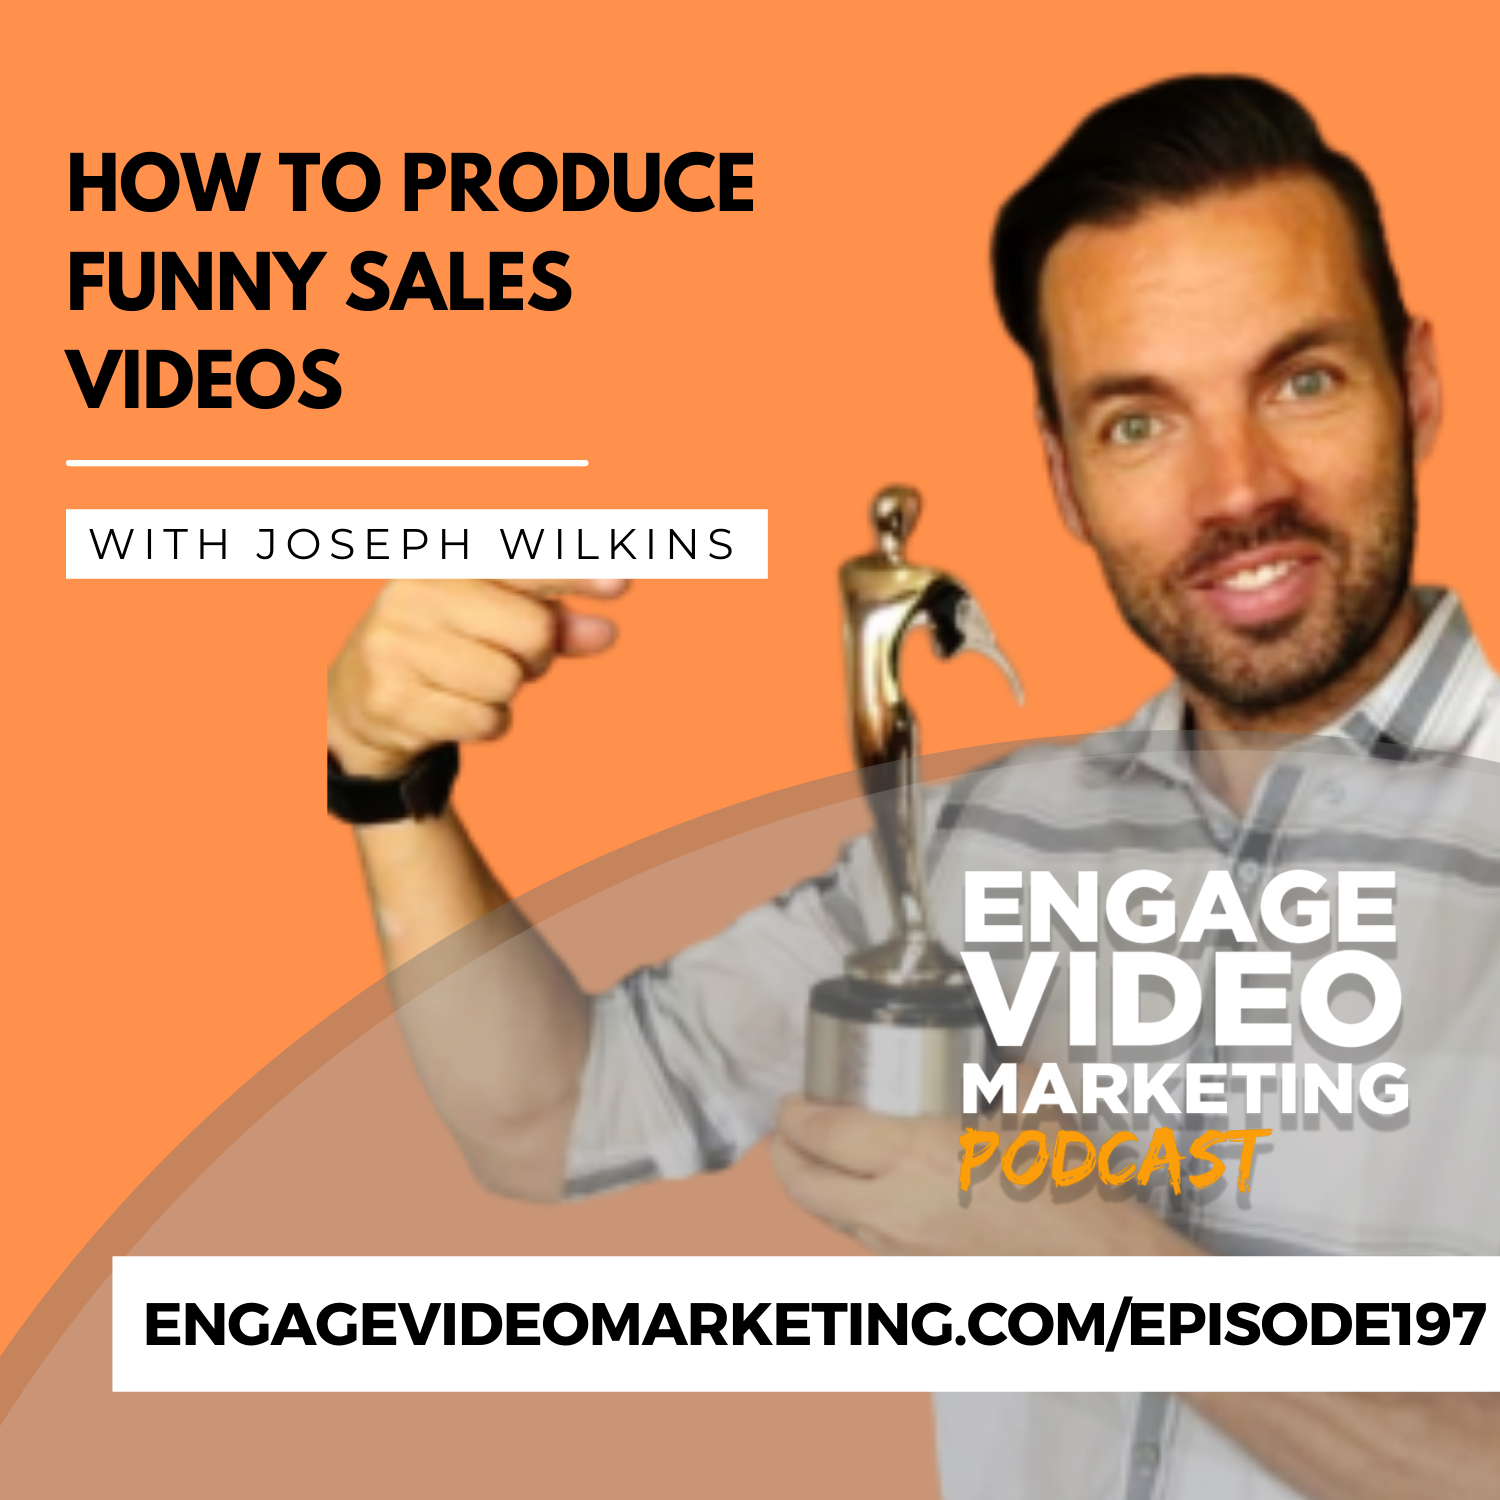 How to Produce Funny Sales Videos with Joseph Wilkins